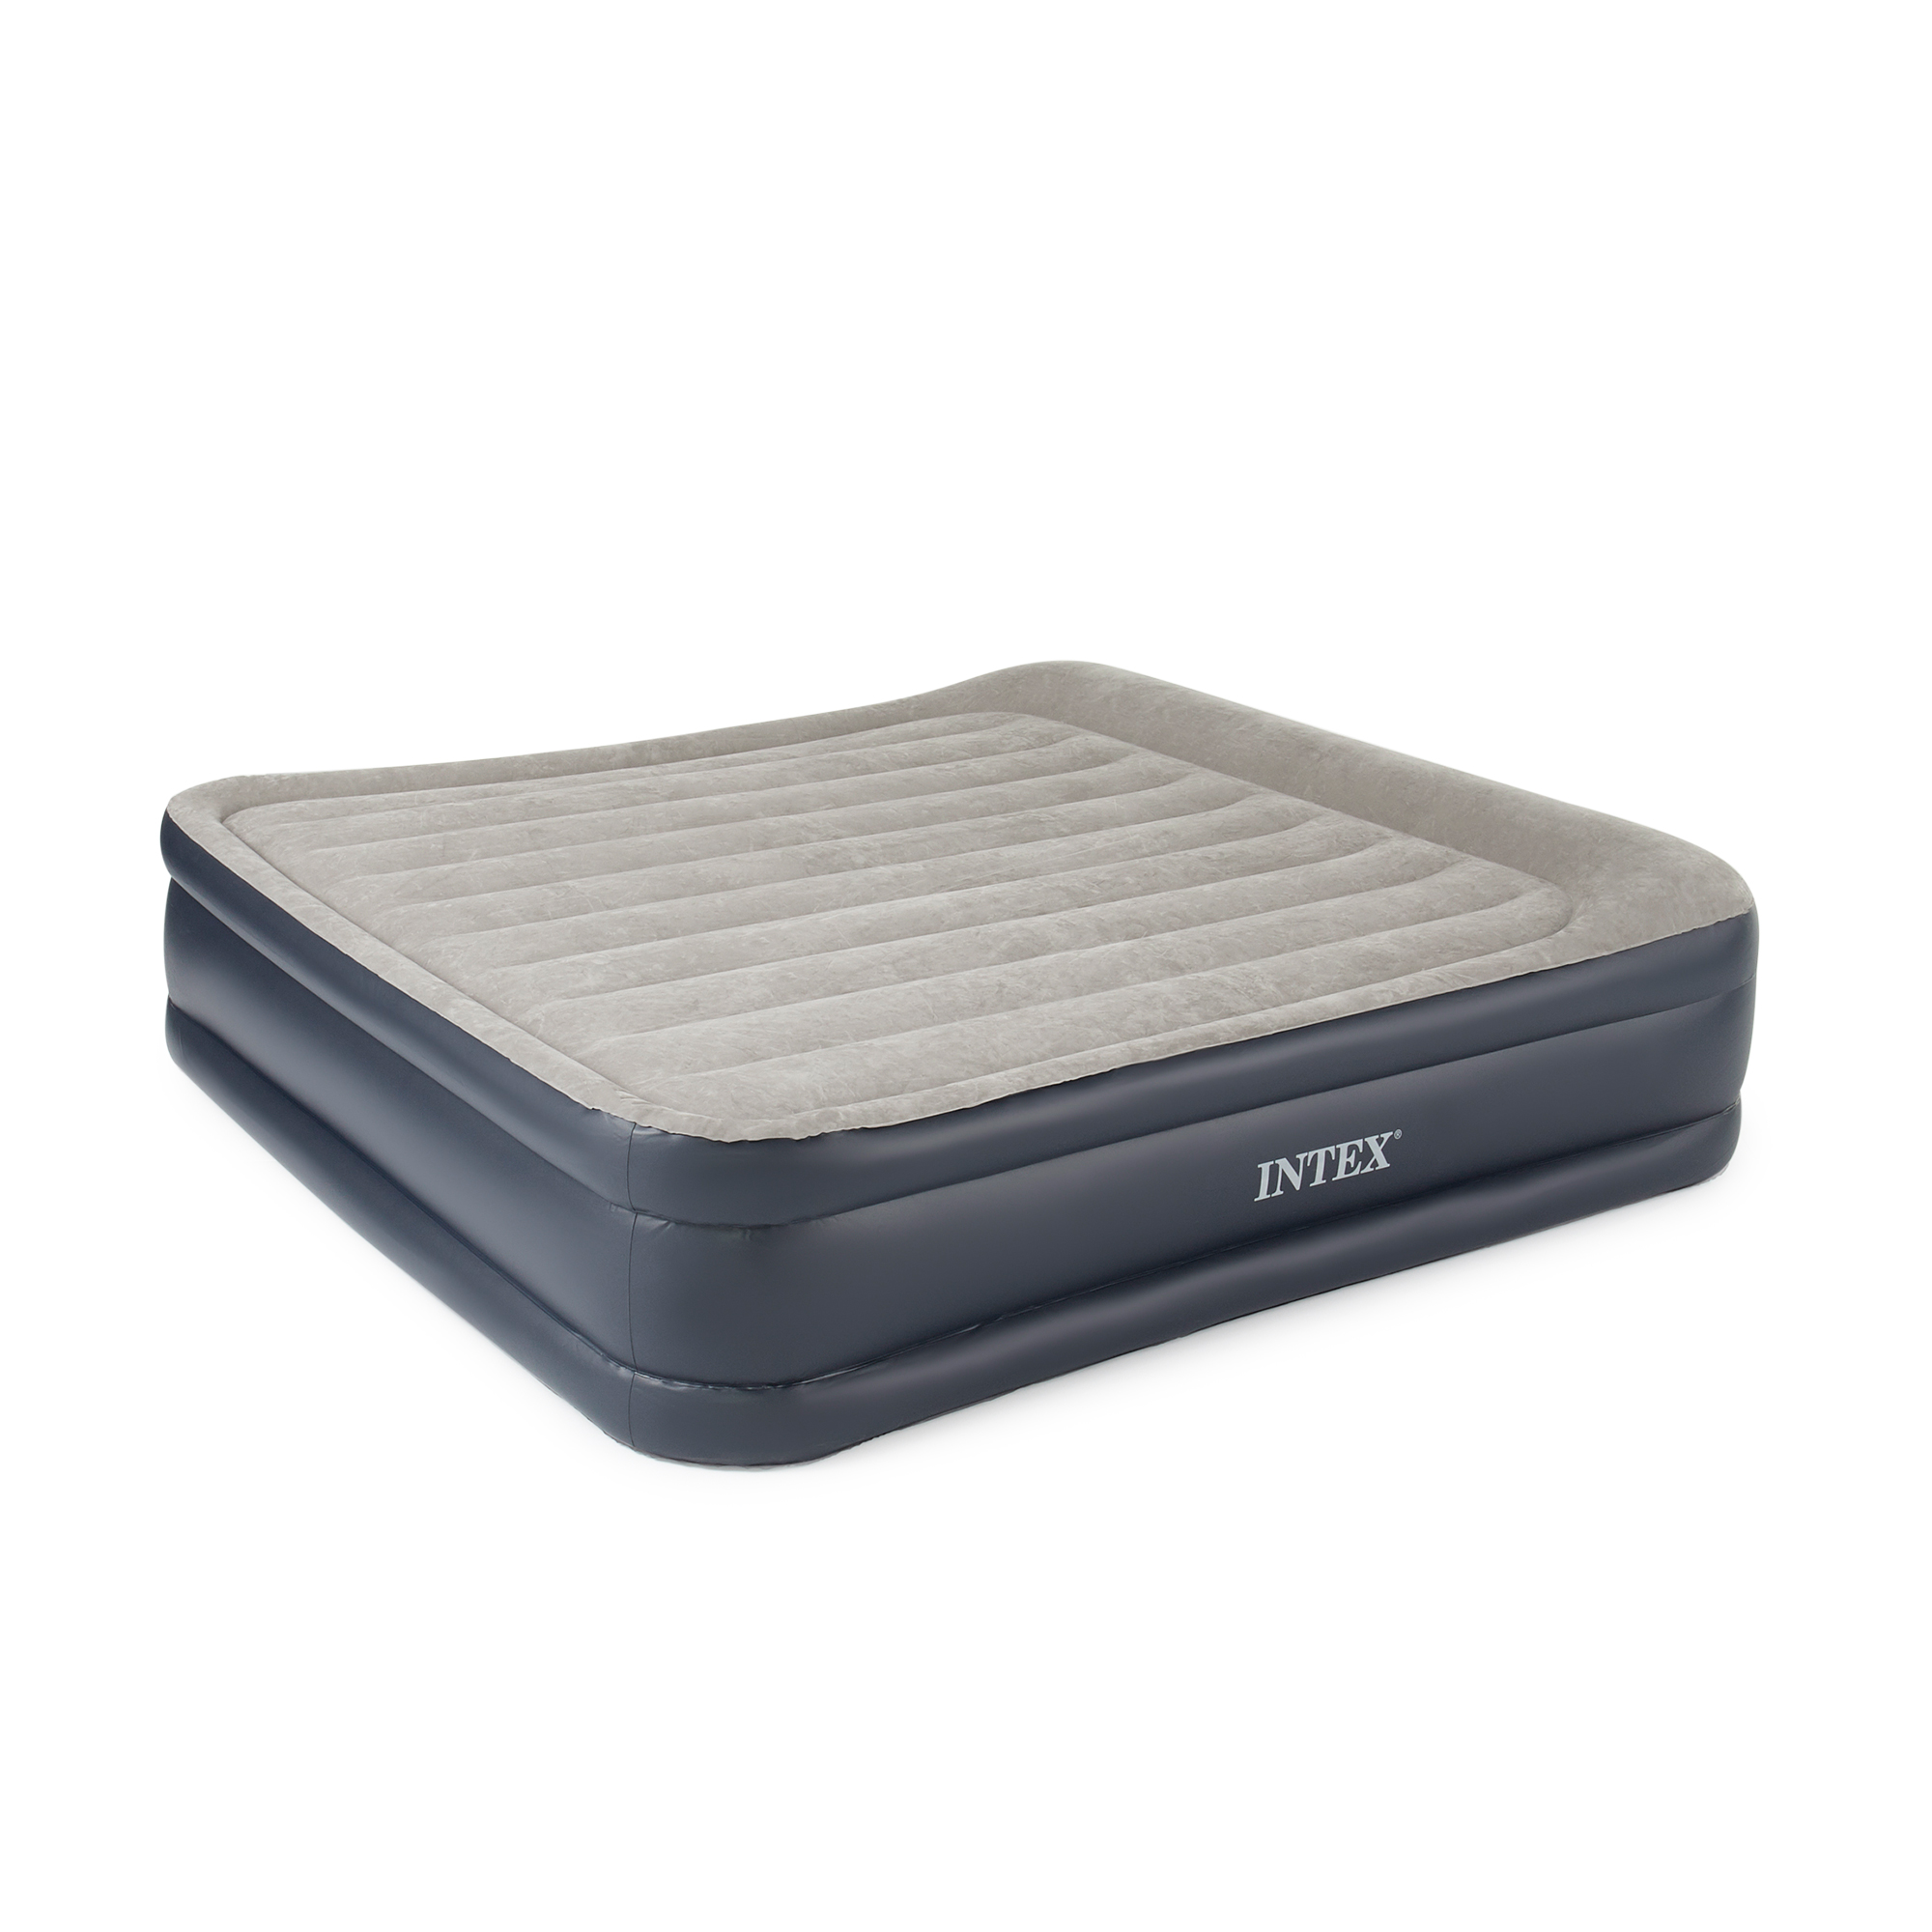 Intex King Deluxe Pillow Rest Inflatable Air Mattress Bed with Built In Pump - image 1 of 7